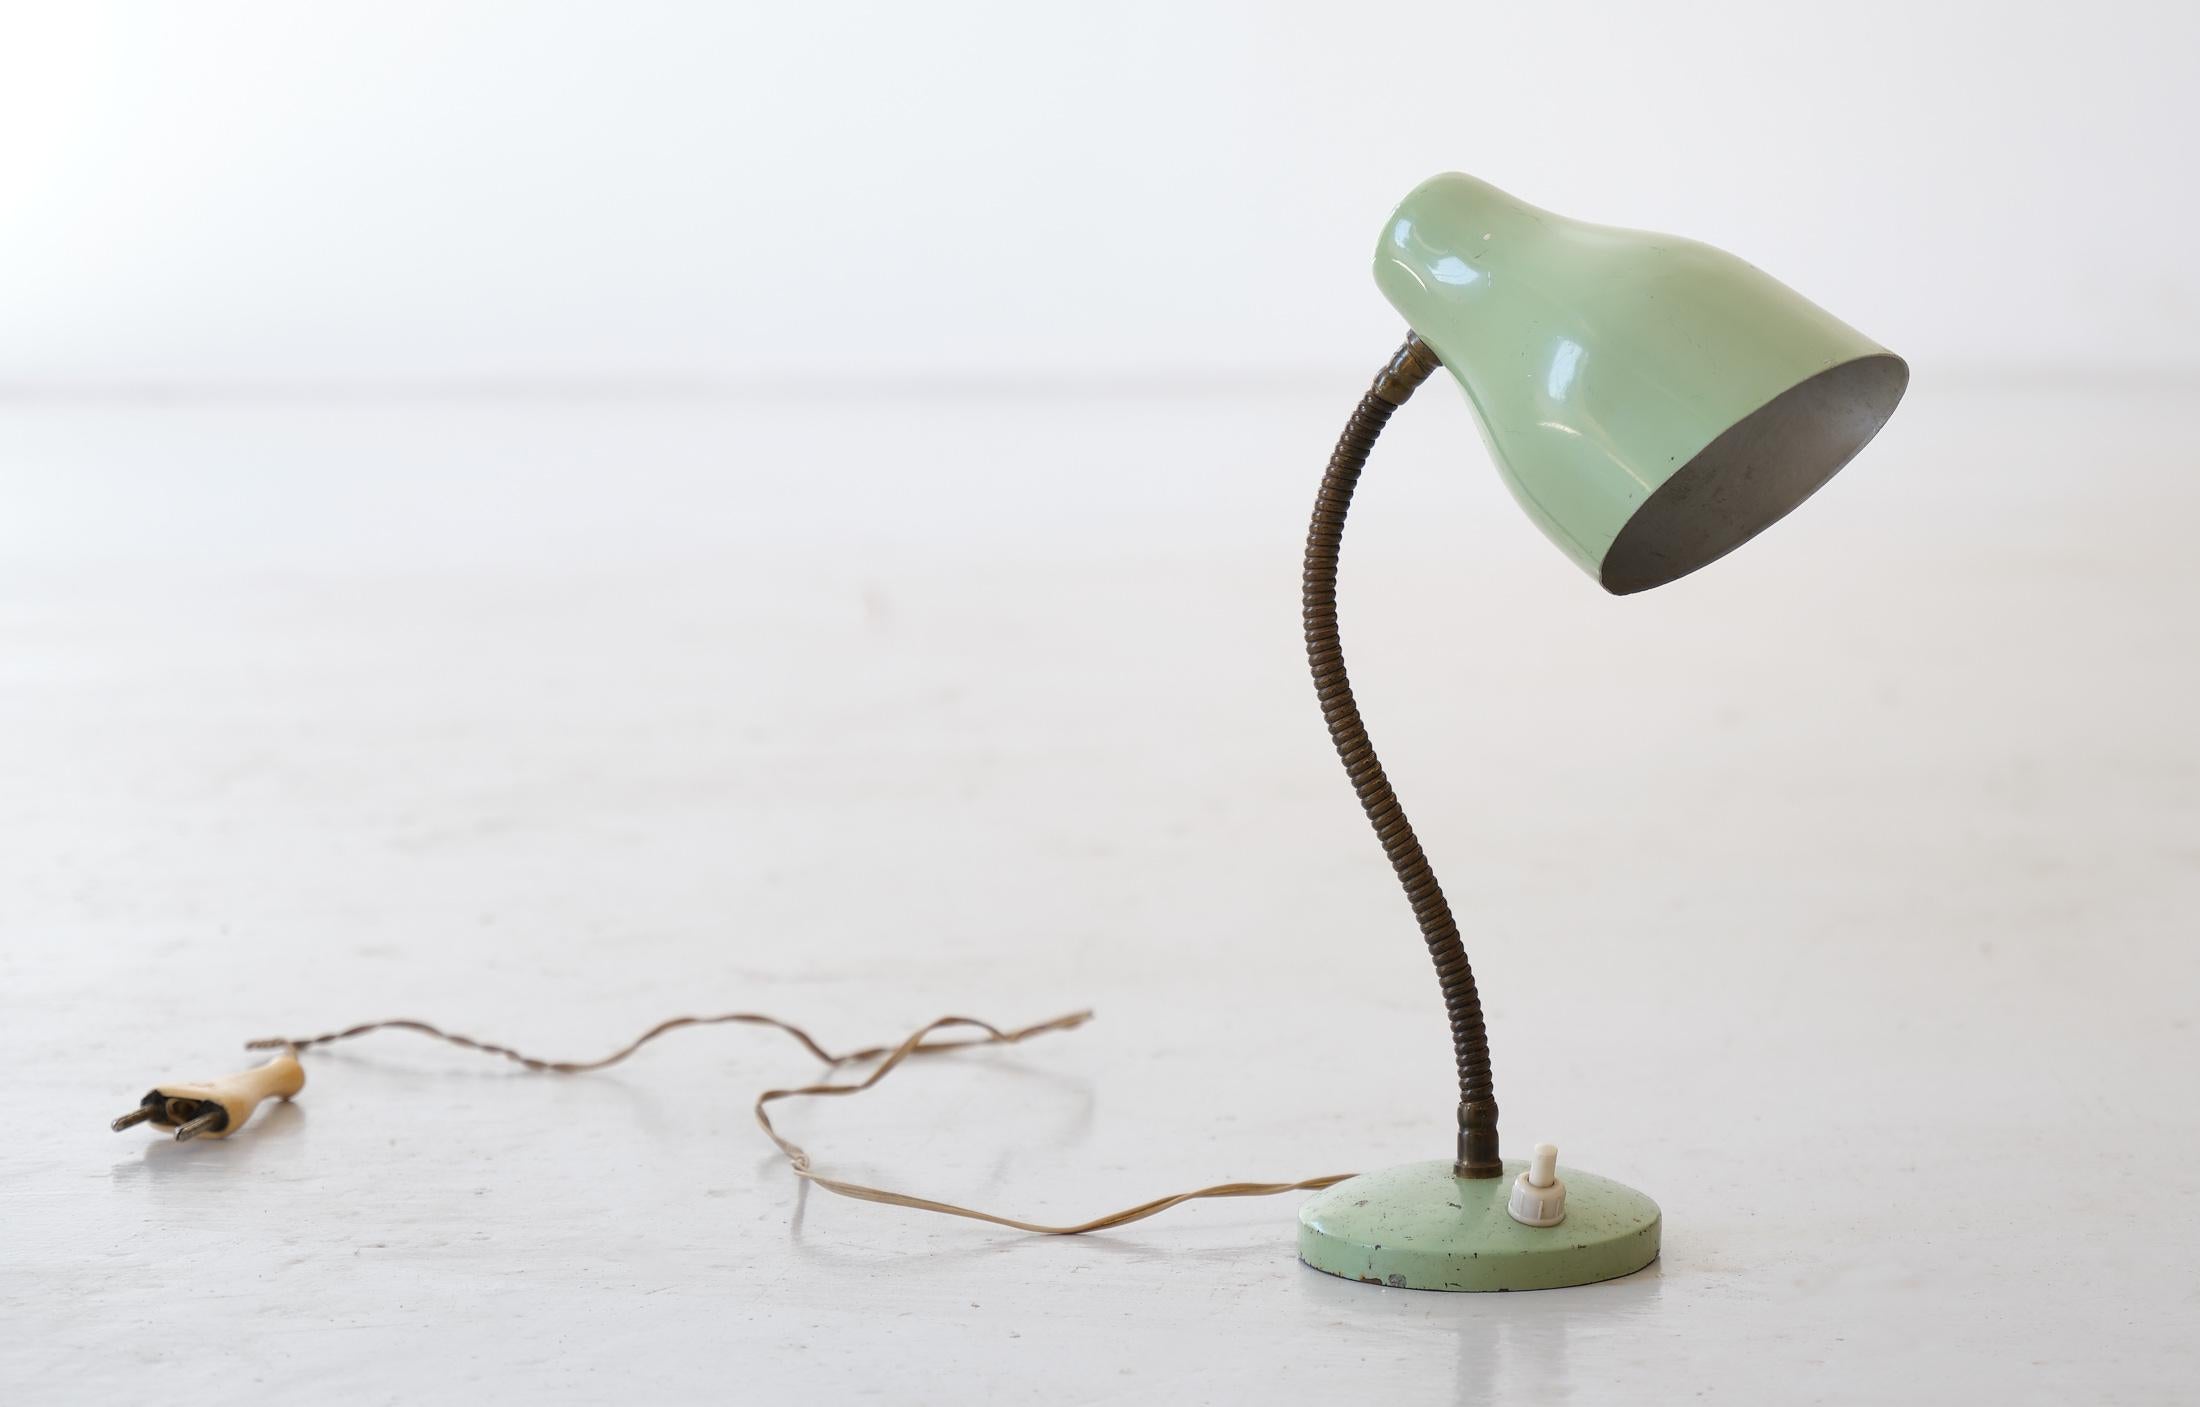 Small vintage table or bedside lamp, made of brass and green-colored enamelled metal, Italy, 1950's.

This abat jour is in good vintage condition.
Original working wire with standard E14 bulbs. We can supply USA plug adapter if needed.